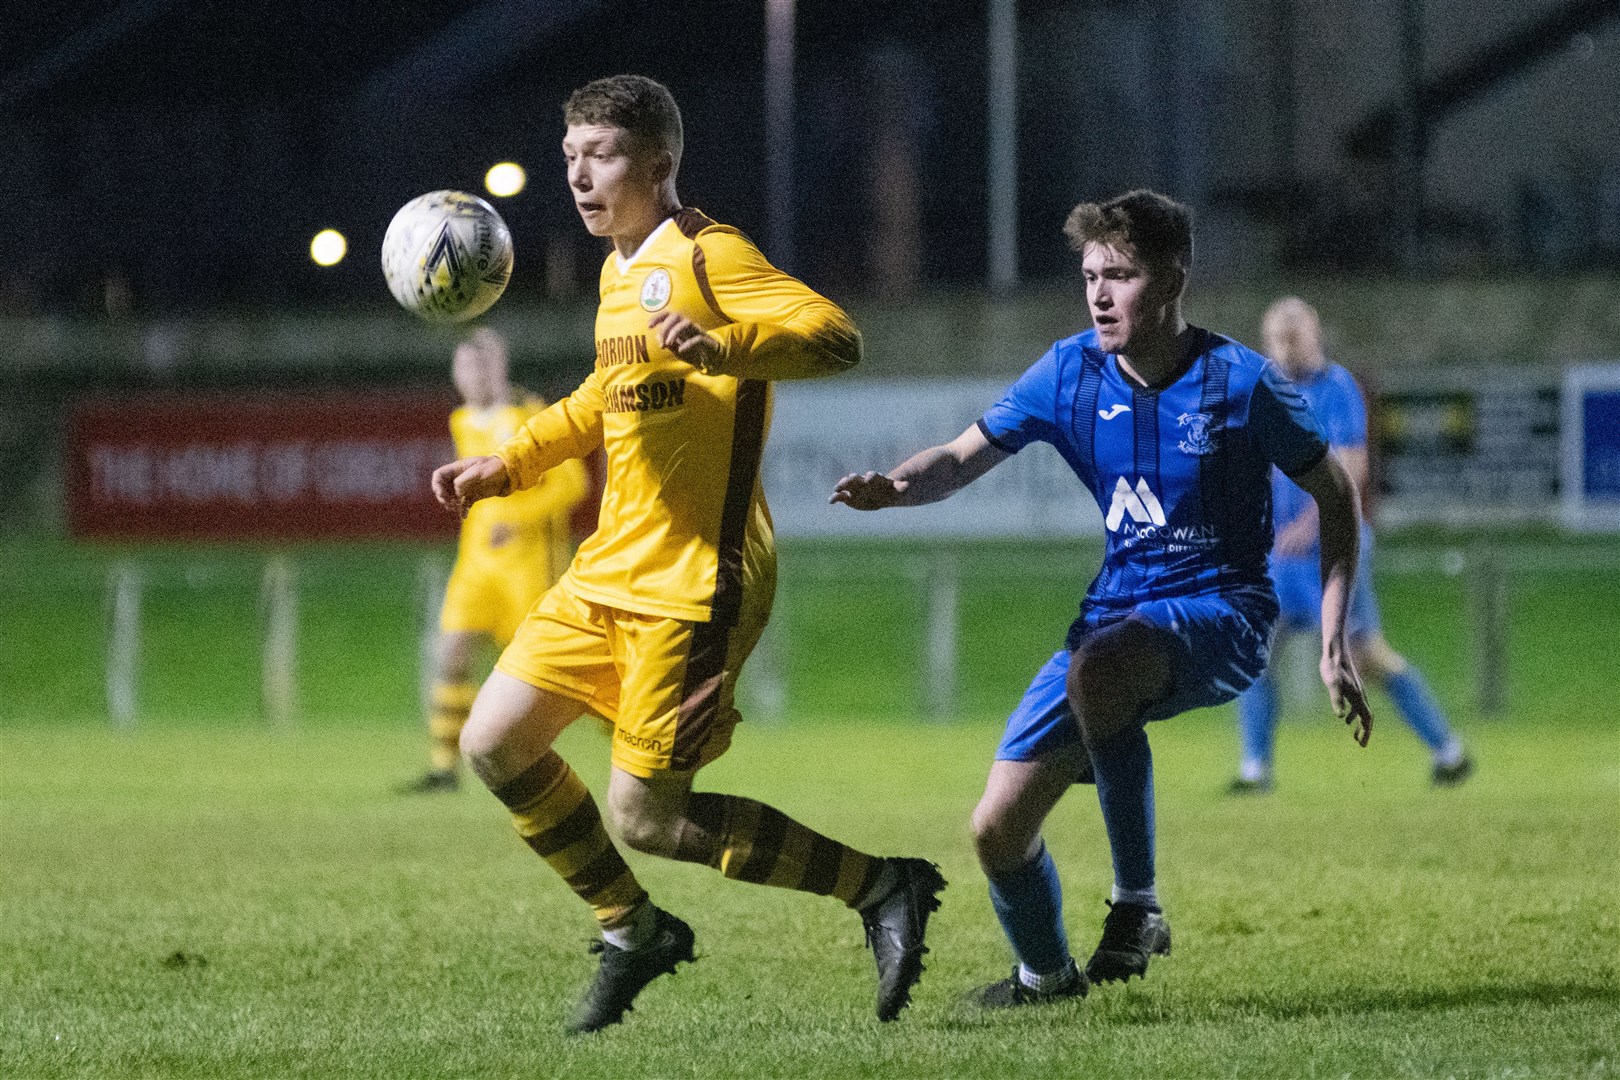 Forres Mechanics' Craig Mackenzie is tracked by Strathspey's Owen Paterson...Forres Mechanics FC (8) vs Strathspey Thistle FC (1) - Highland Football League 22/23 - Mosset Park, Forres 07/01/23...Picture: Daniel Forsyth..